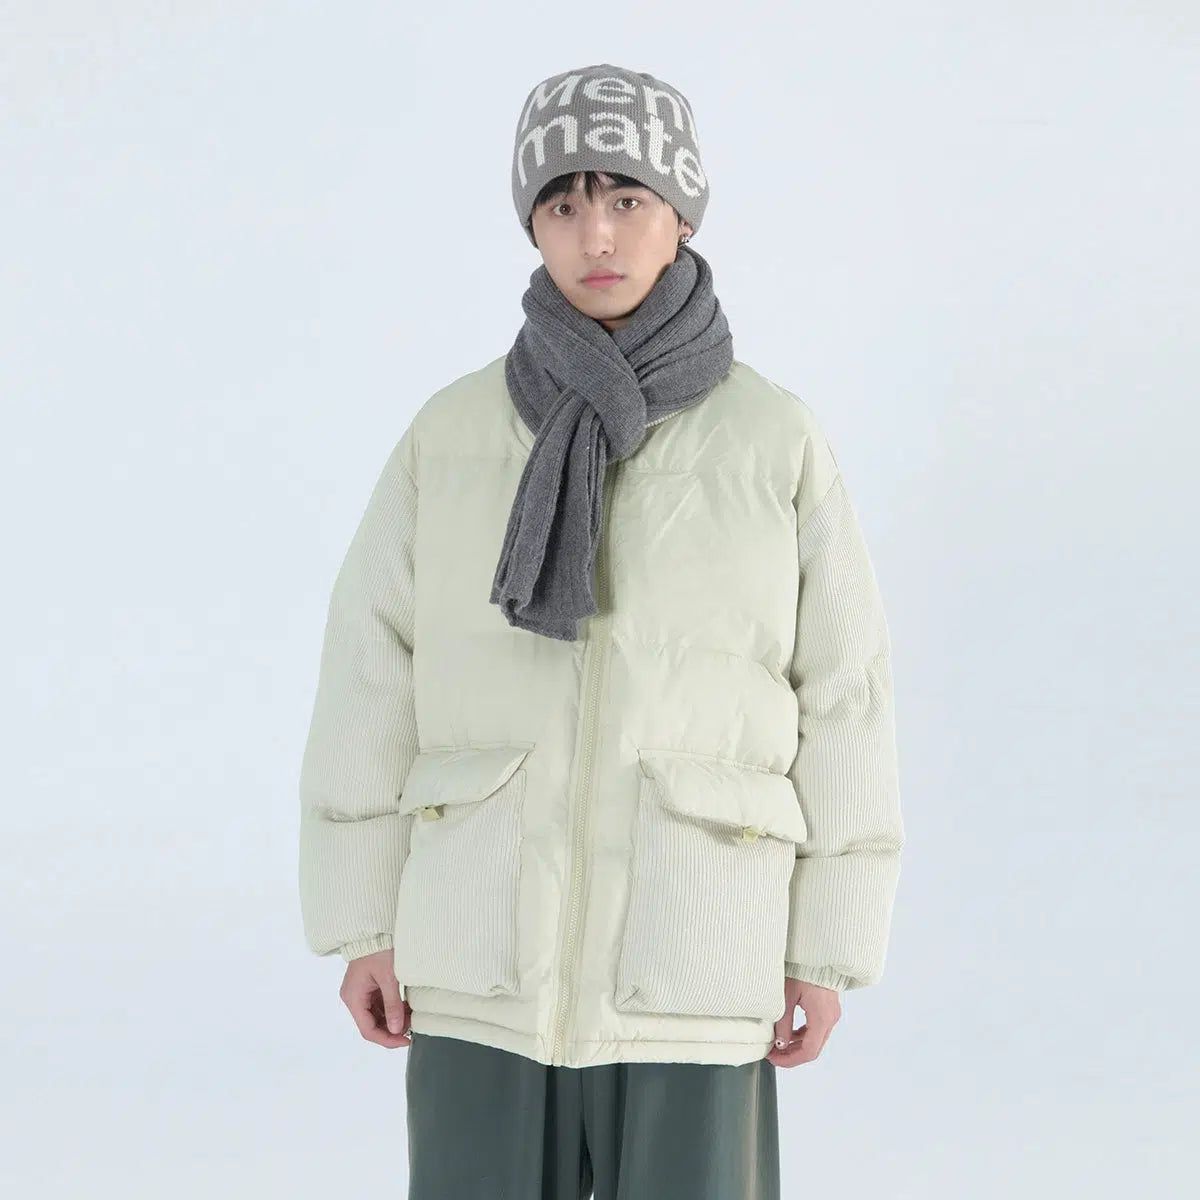 Lined Texture Puffer Jacket Korean Street Fashion Jacket By Mentmate Shop Online at OH Vault